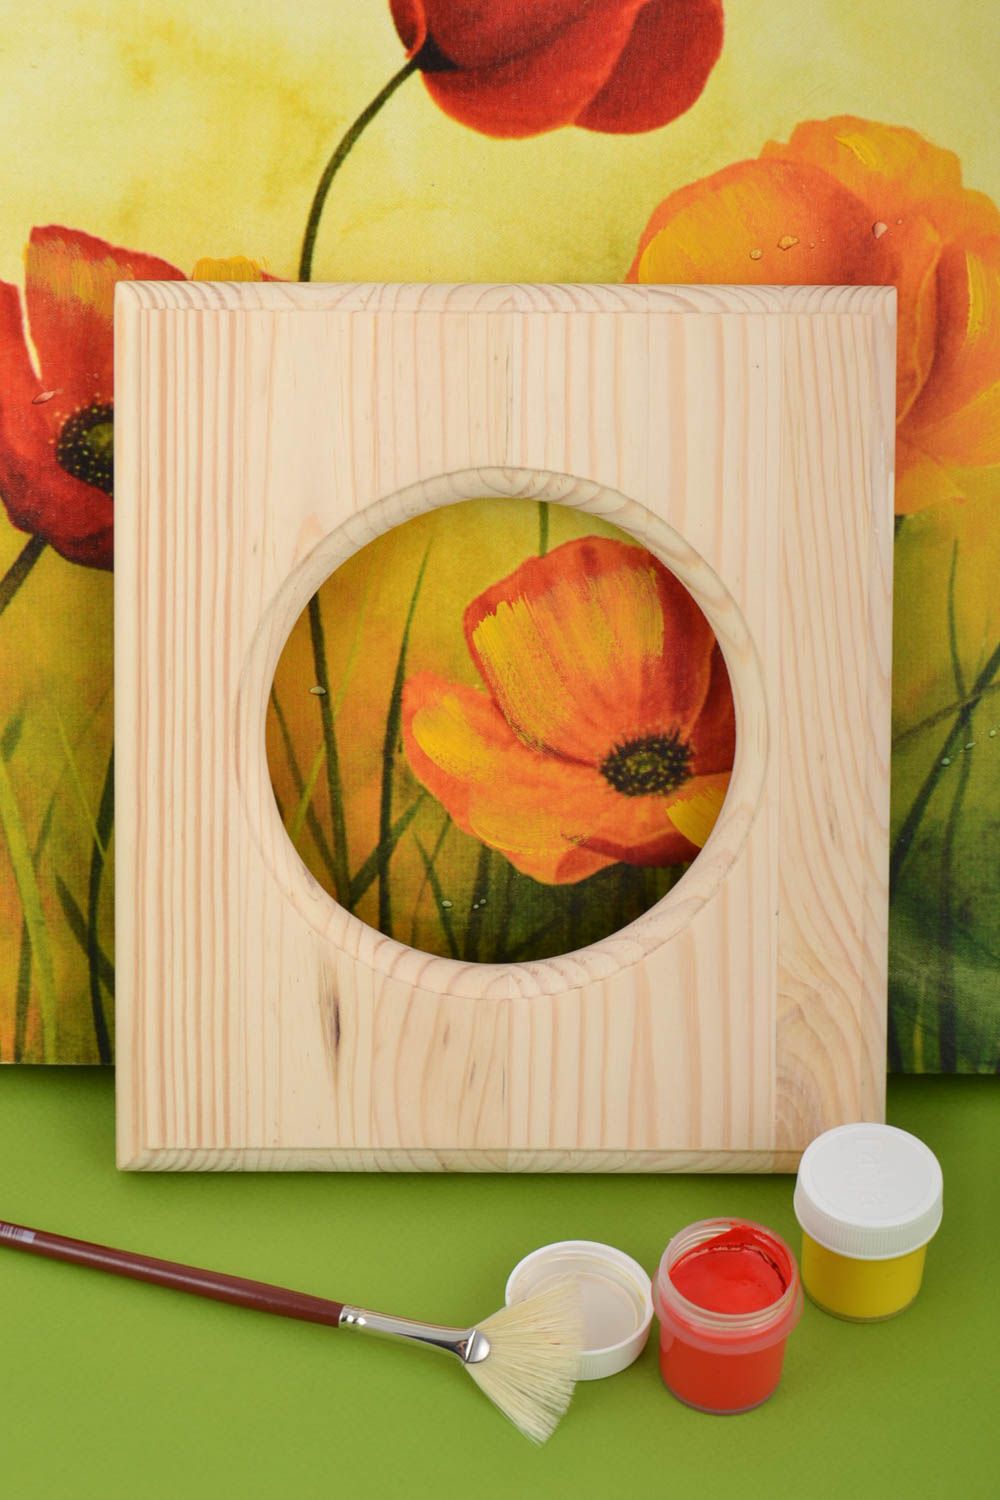 Handmade wooden craft blank for painting or decoupage photo frame with round cut photo 1